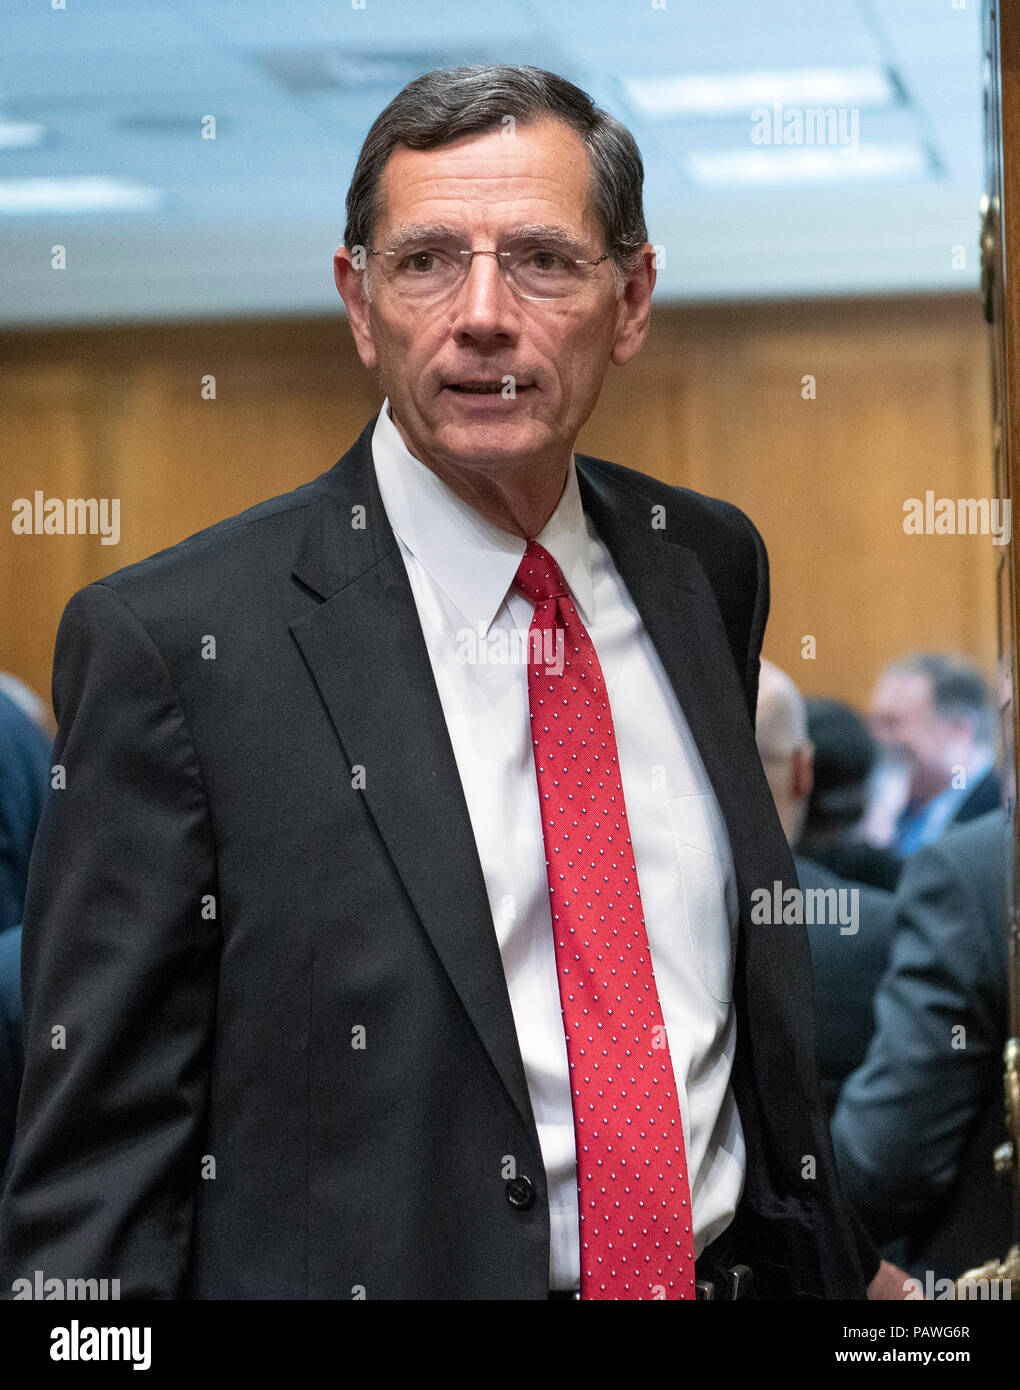 United States Senator John Barrasso (Republican of Wyoming) arrives to hear US Secretary of State Mike Pompeo testify before the US Senate Committee on Foreign Relations on 'An update on American Diplomacy to Advance our National Security Strategy' on Capitol Hill in Washington, DC on Wednesday, July 25, 2018. Pompeo took questions on the Helsinki Summit with President Putin of Russia and progress on the denuclearization of North Korea. Credit: Ron Sachs/CNP | usage worldwide Stock Photo